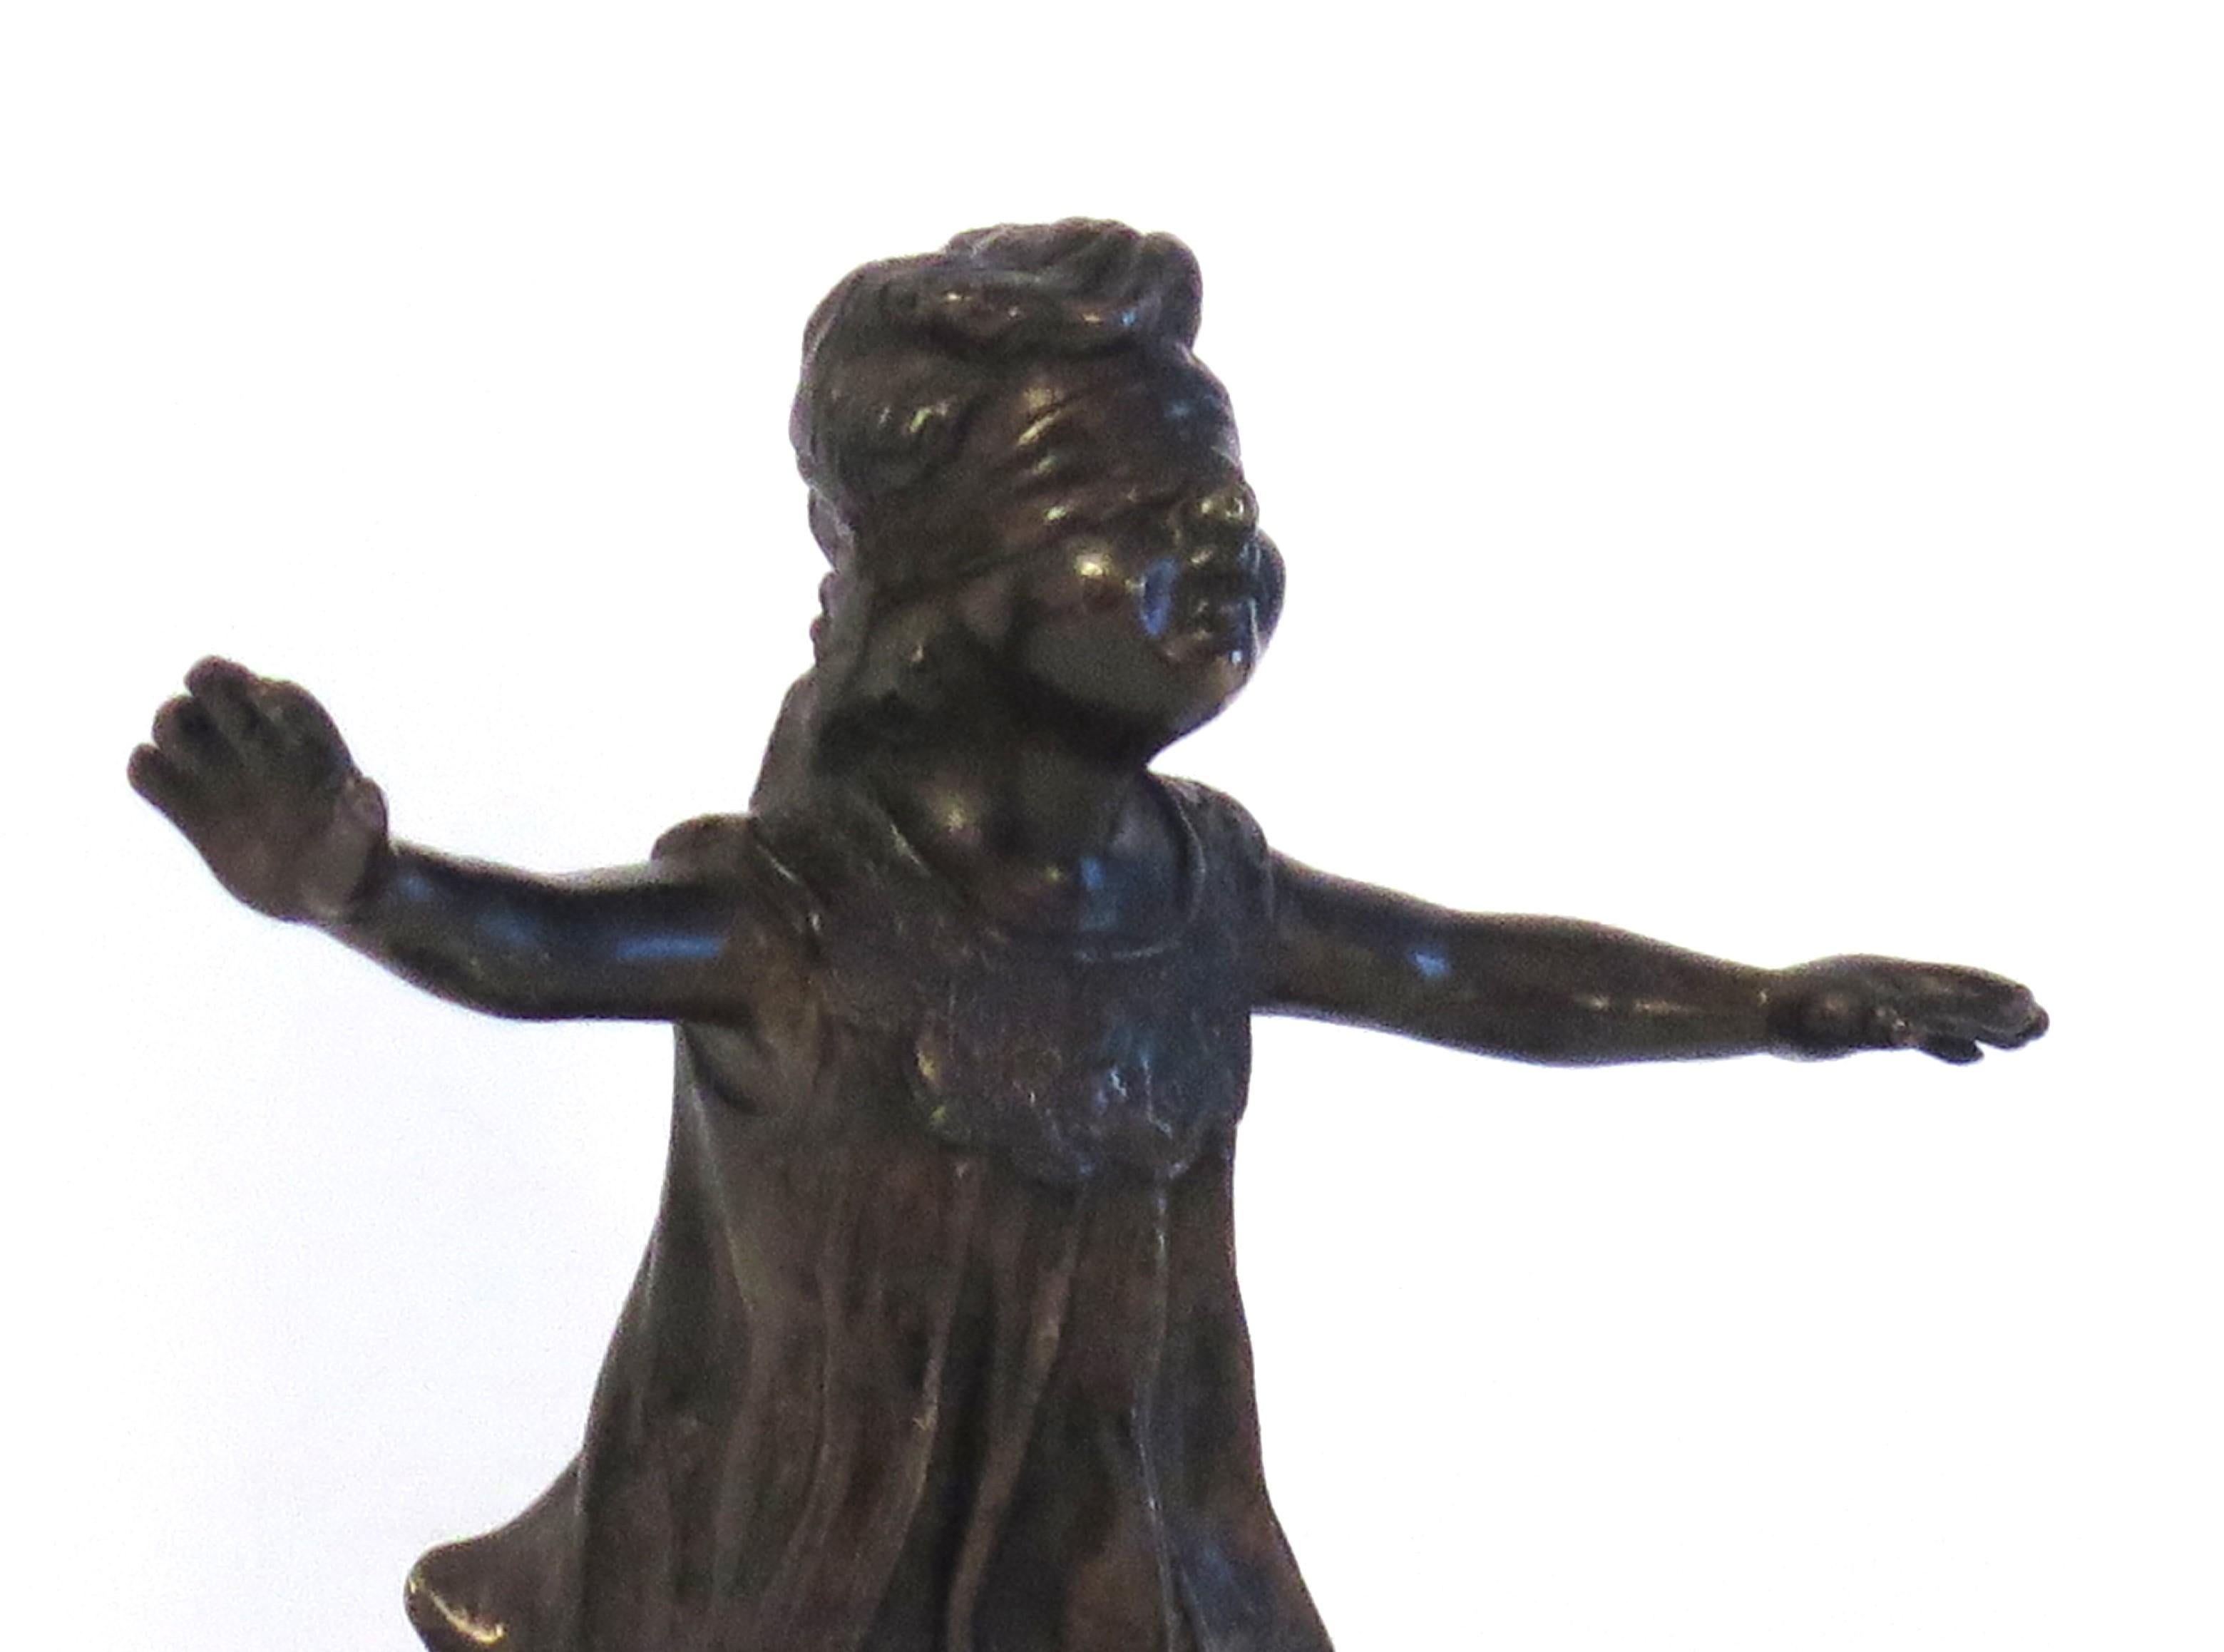 This is a solid bronze figurine of a young Girl with a blindfold playing Hide and Seek, which we attribute to the Italian sculptor Giuseppe Ferrari ( Ferrara , 1804 - Ferrara , 1884 ) this piece being made in the last quarter of the 19th